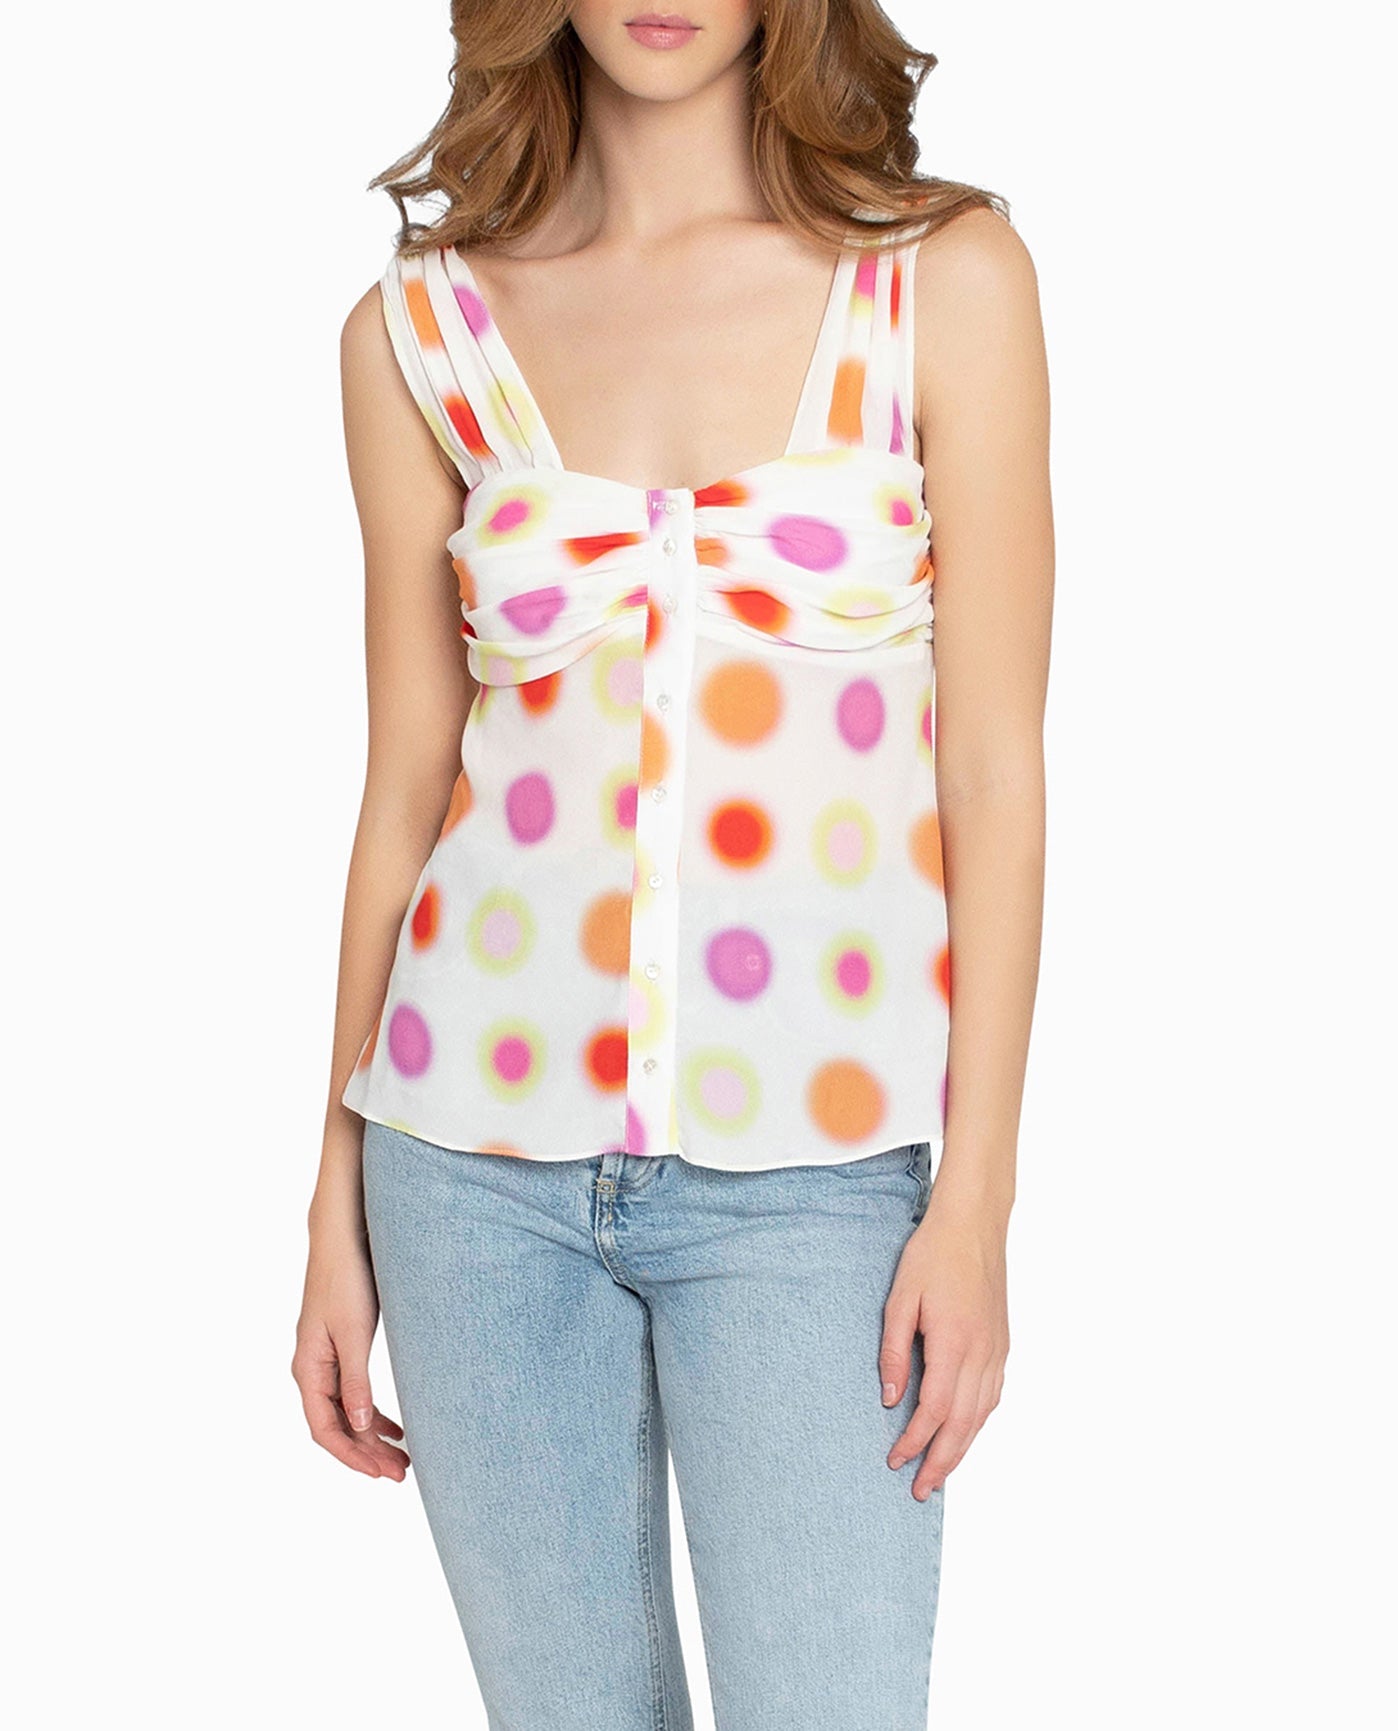 RADIANT AURA SILK TOP WITH DECORATIVE BUTTONS | WHITE AURA DOT